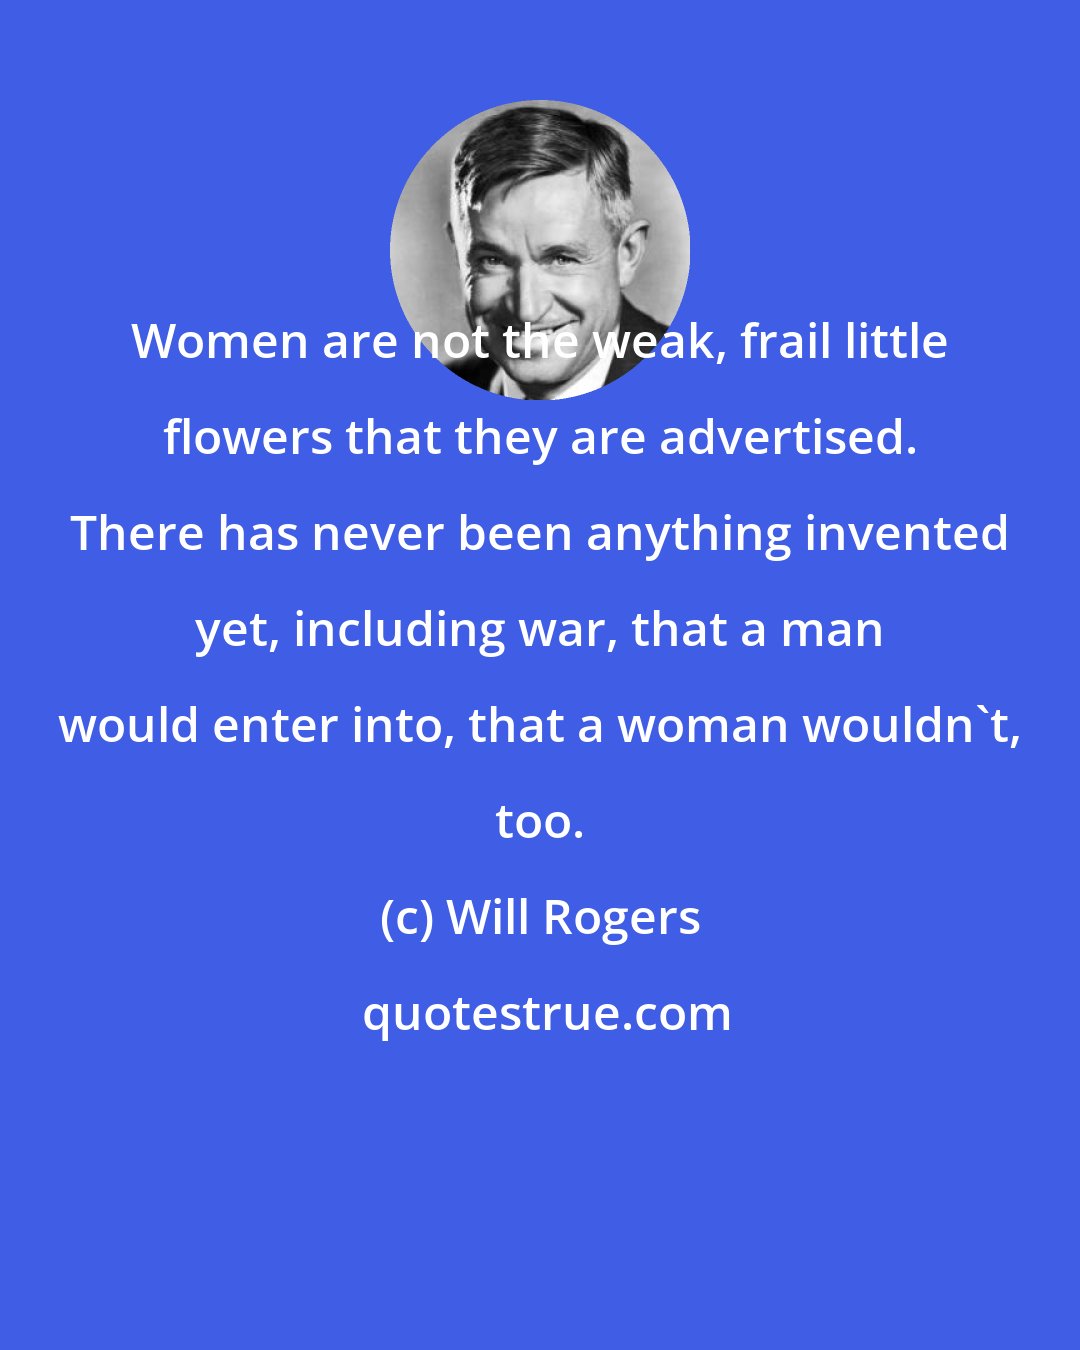 Will Rogers: Women are not the weak, frail little flowers that they are advertised. There has never been anything invented yet, including war, that a man would enter into, that a woman wouldn't, too.